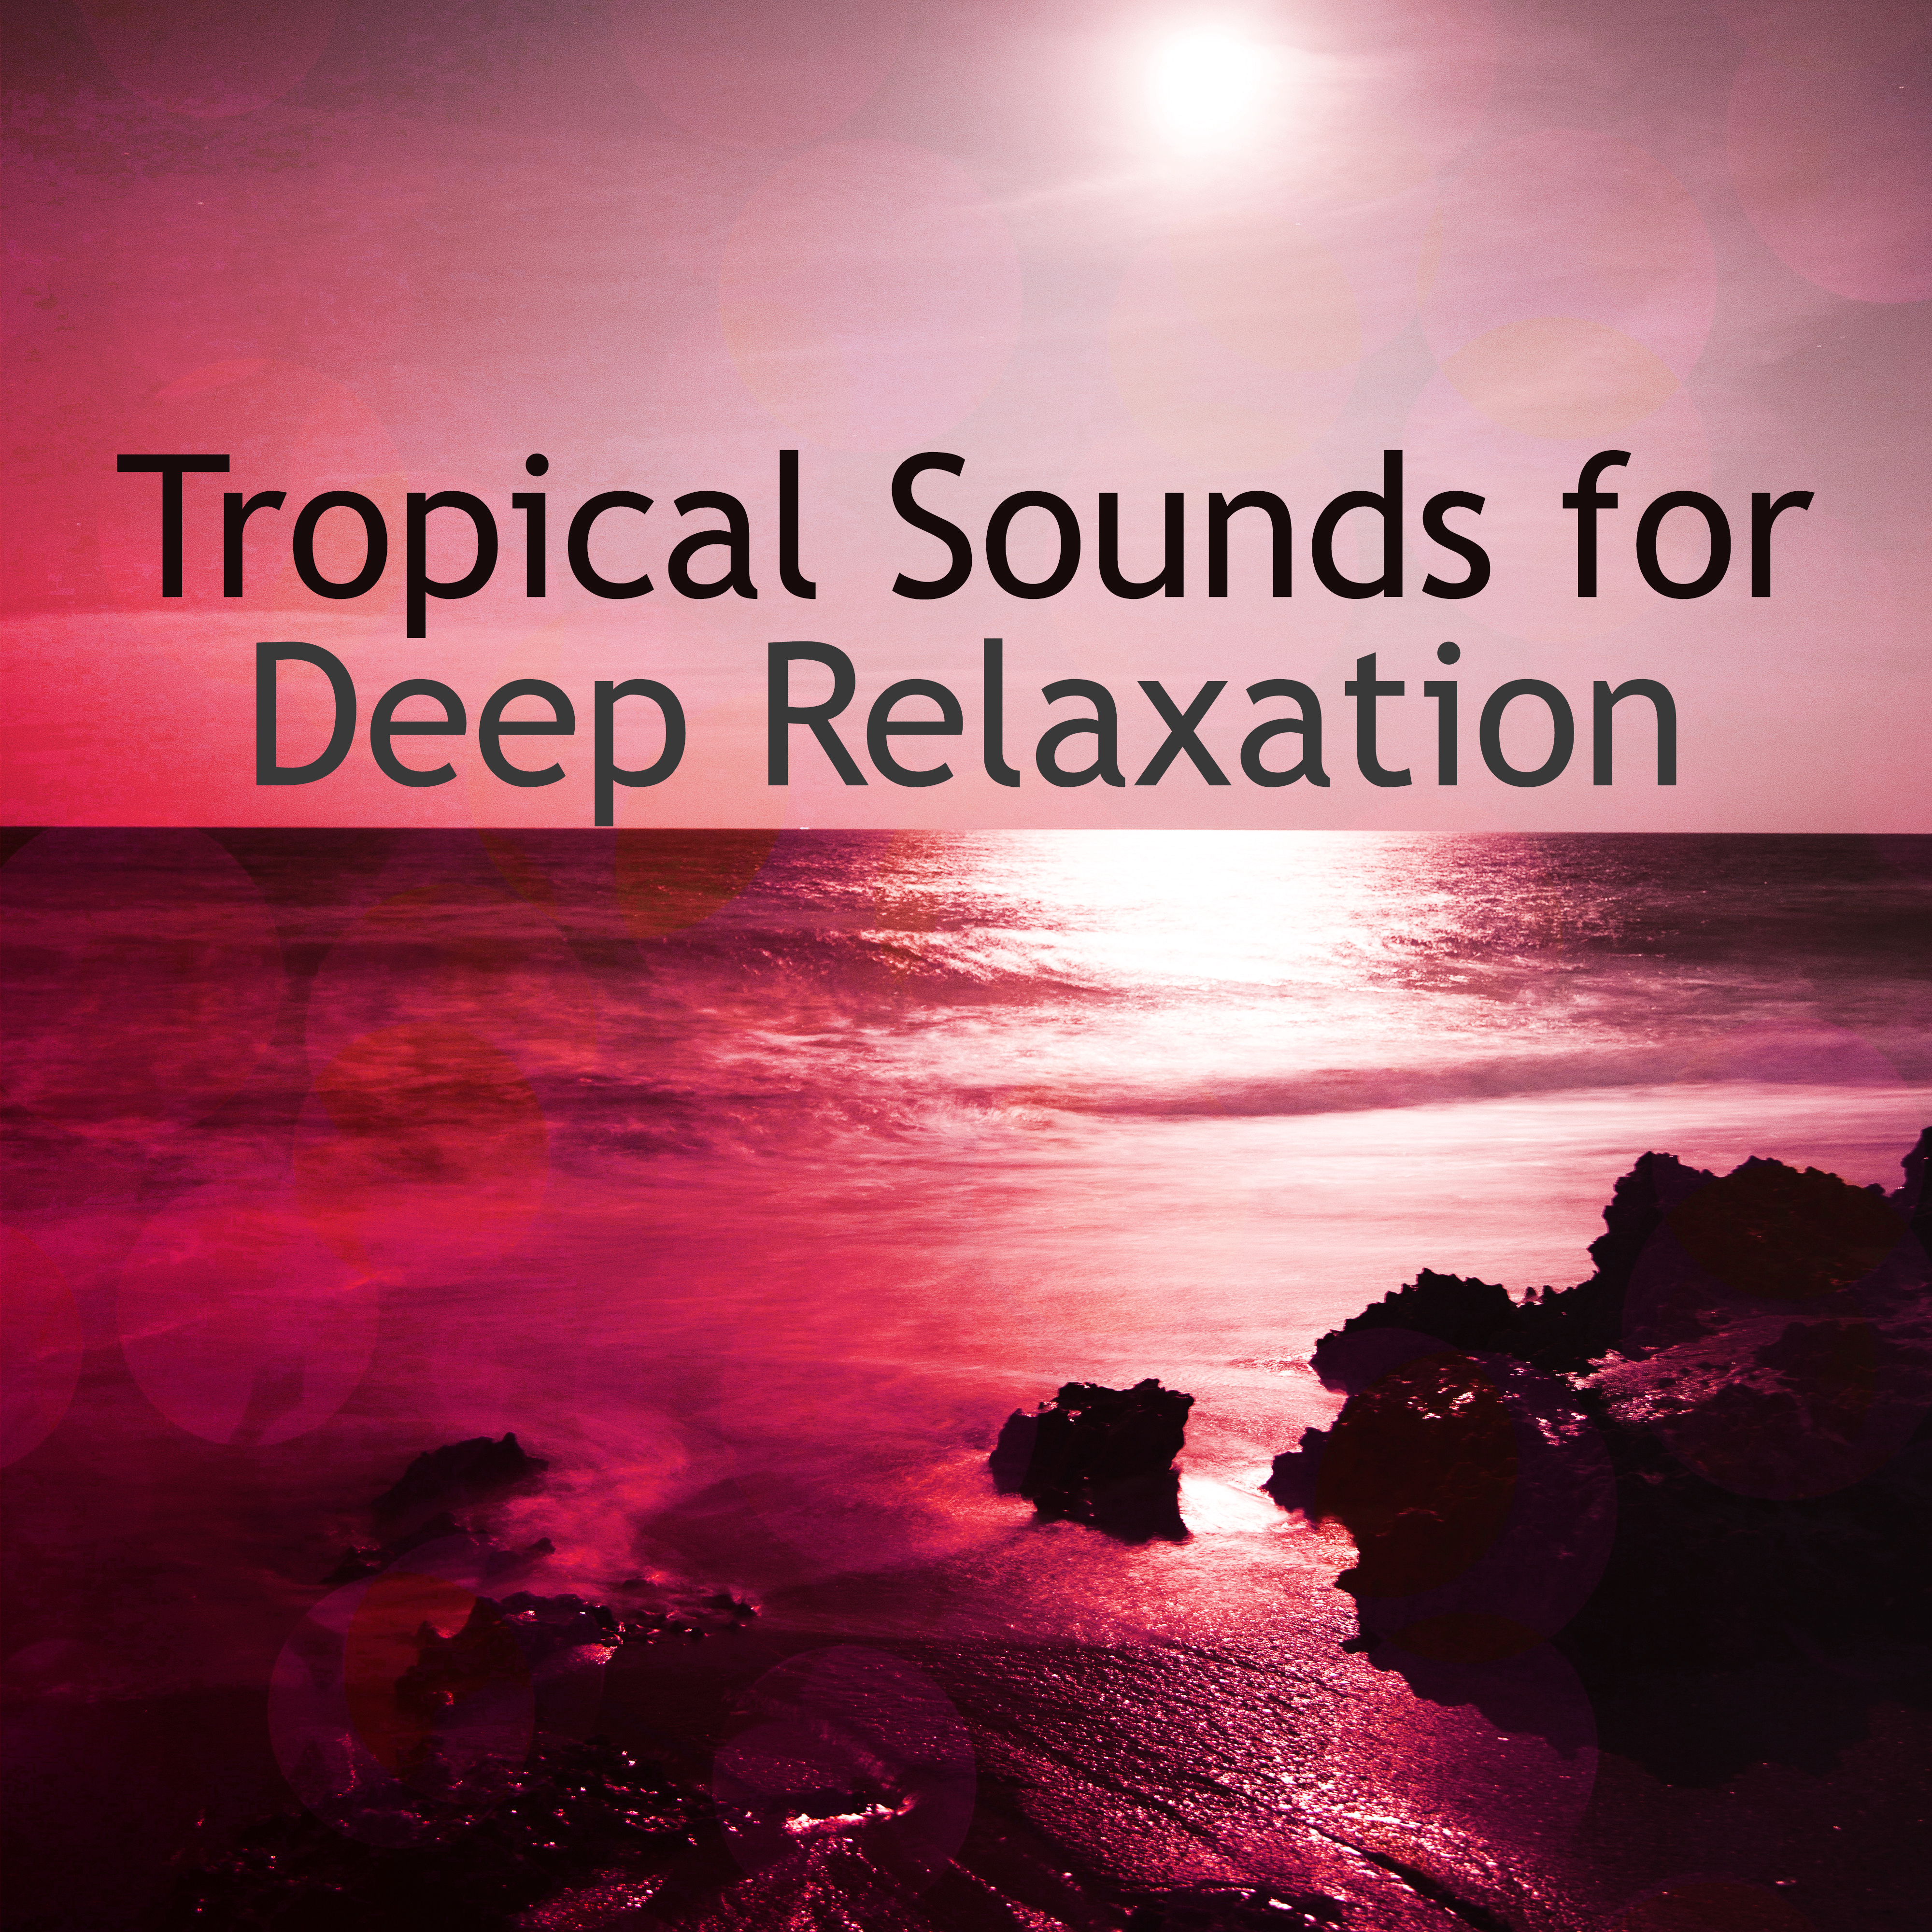 Tropical Sounds for Deep Relaxation – Chillout Music, Summertime, Island Lounge, Holiday Songs, Deep Sun, Hot Holiday, Beach Chill